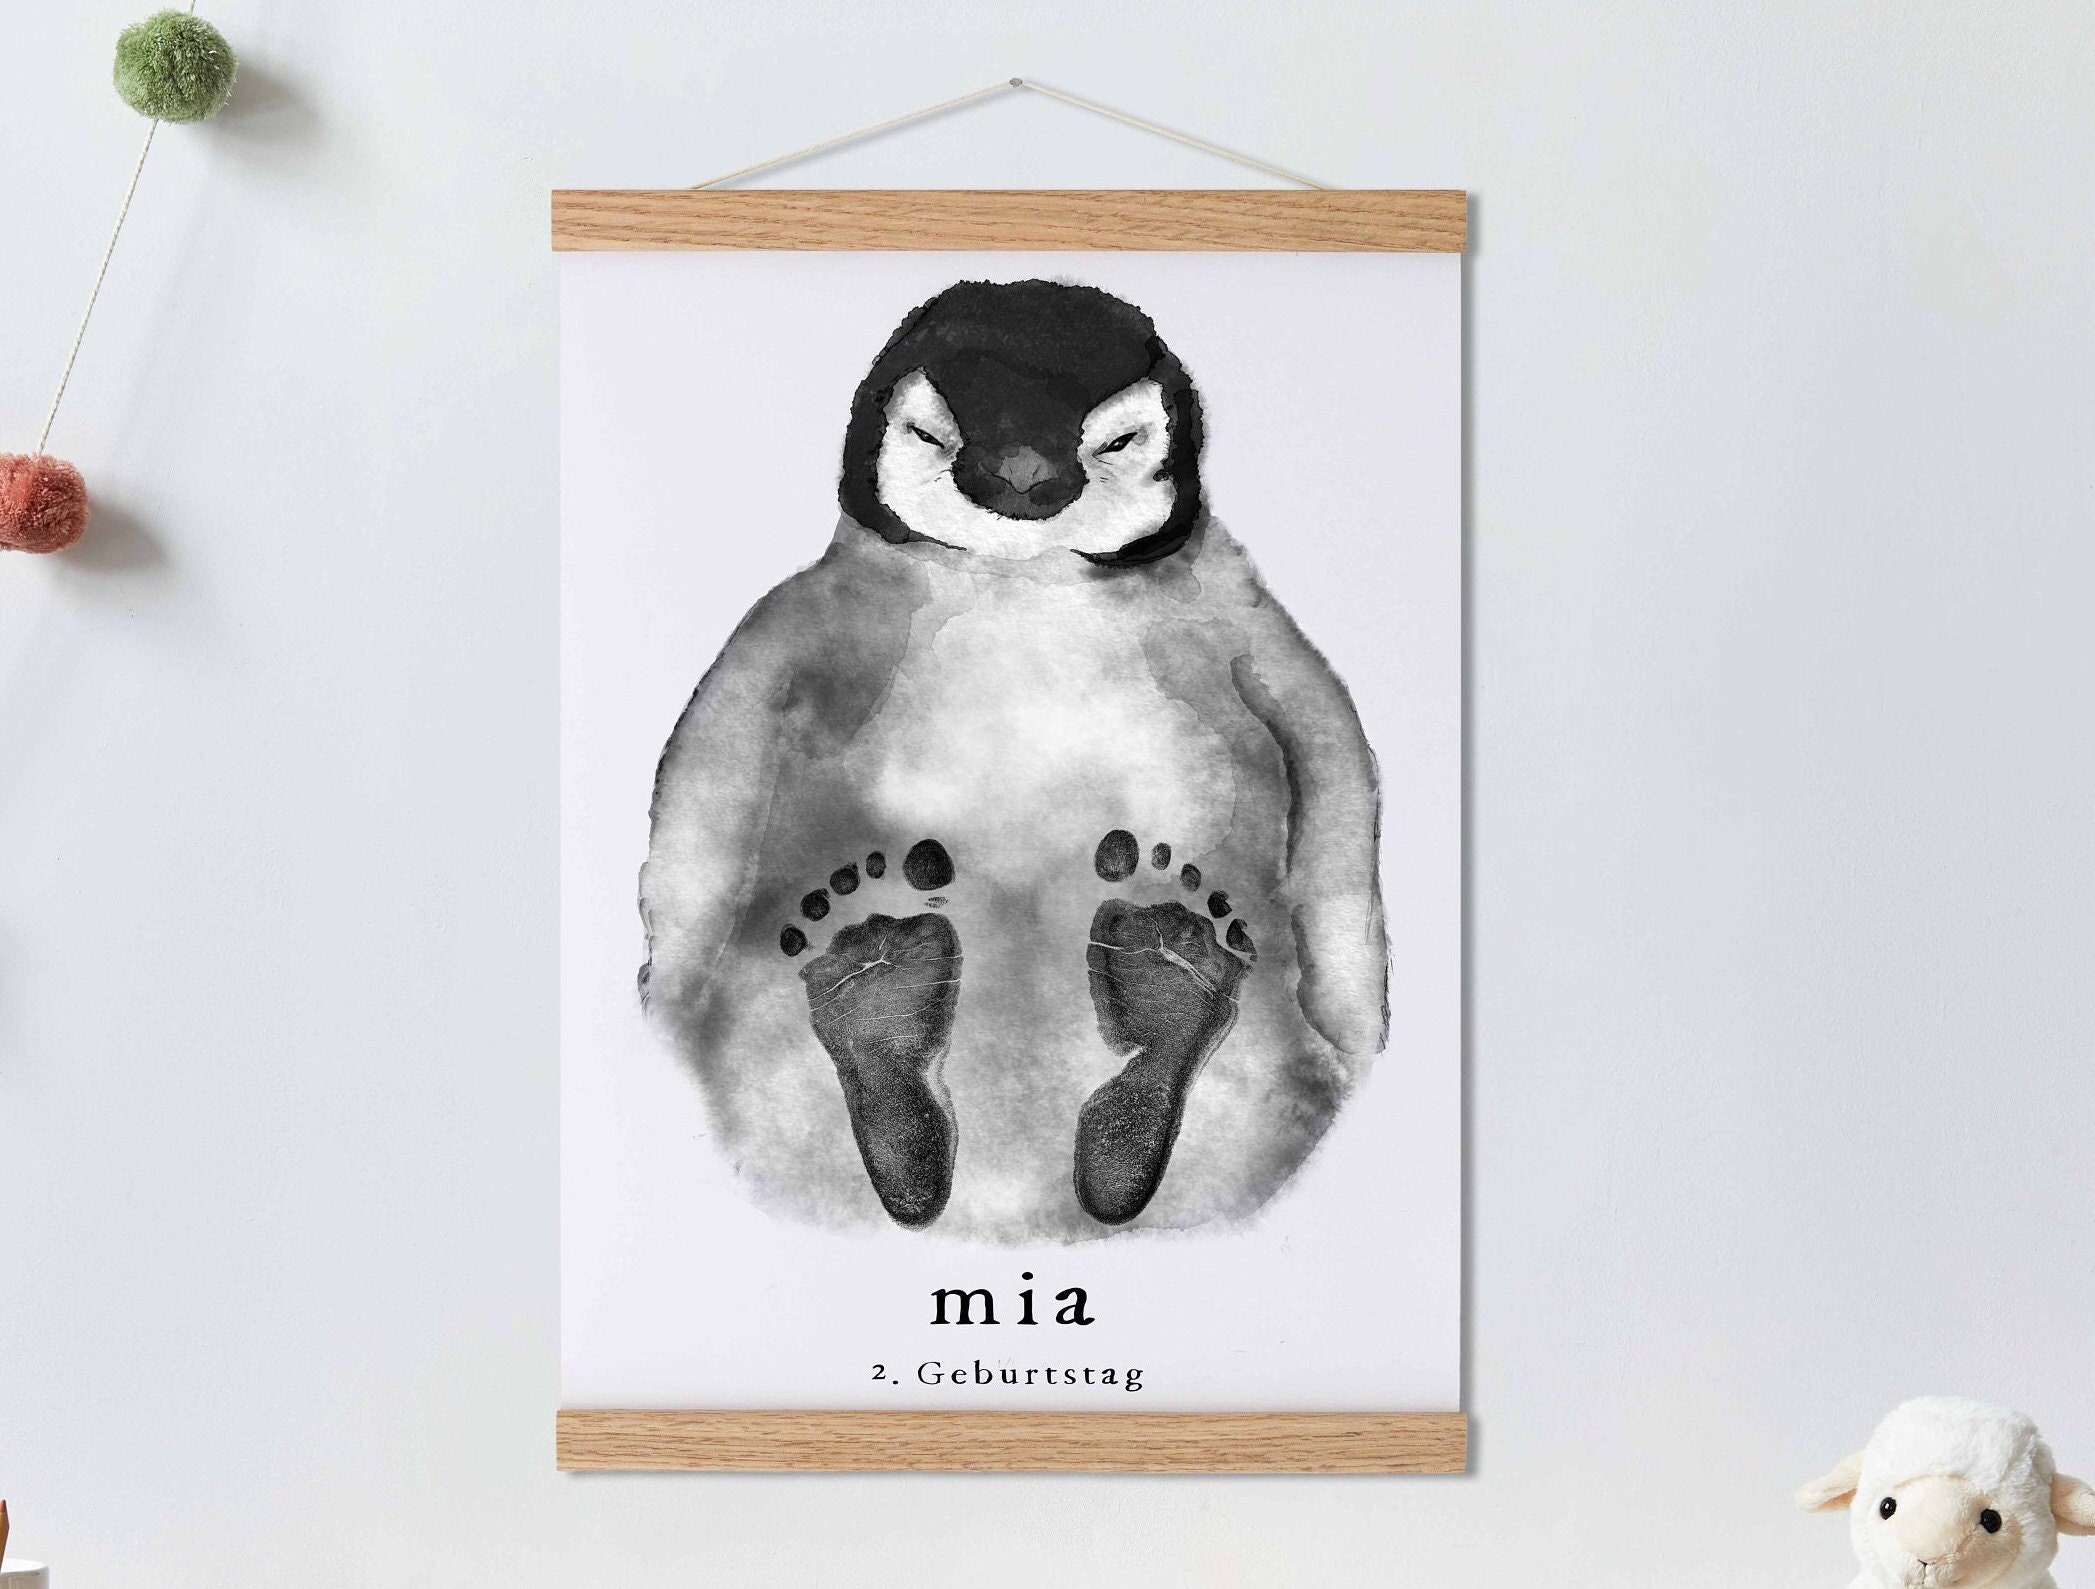 Penguin Baby Footprint Kit Canvas - Memorialize Baby Foot Prints with This  One of a Kind Baby